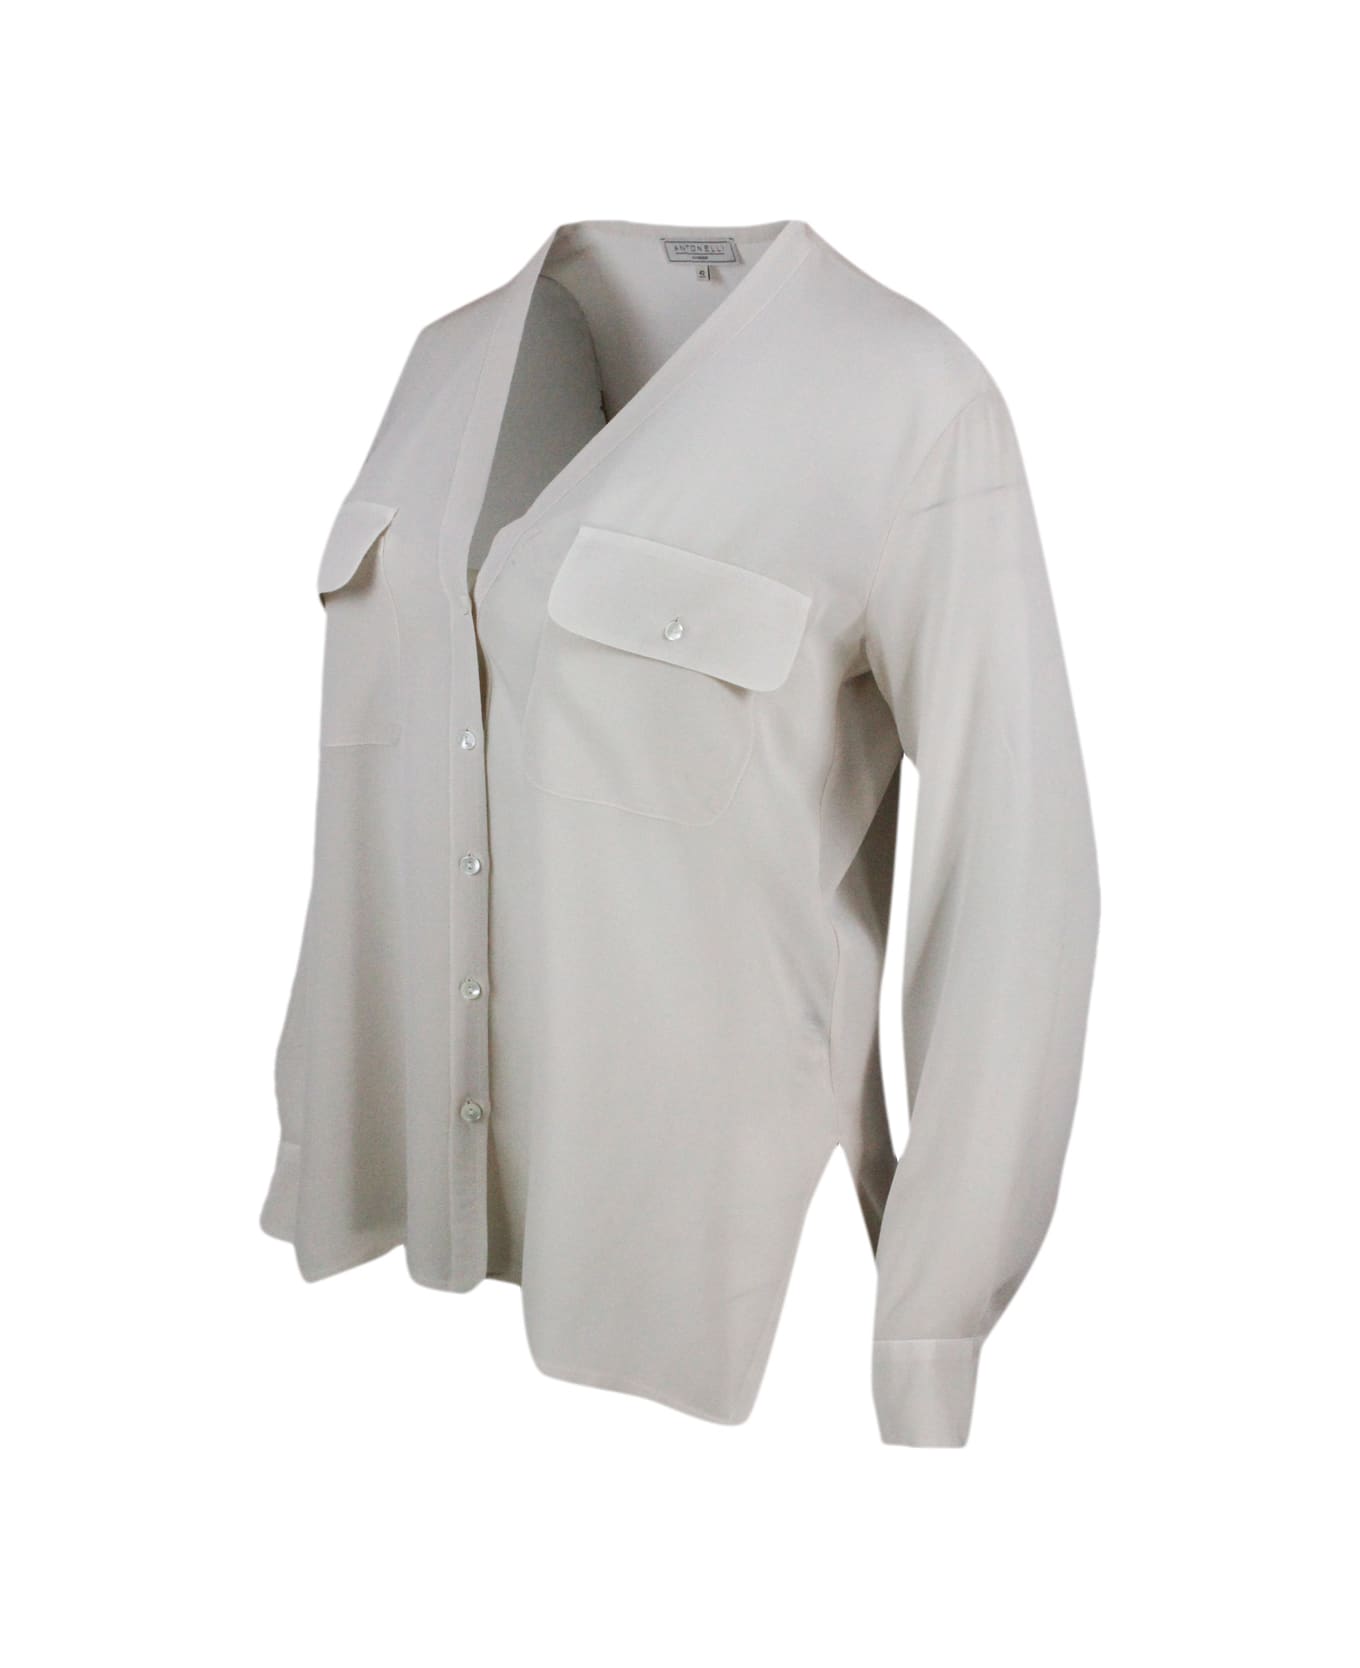 Antonelli Shirt Made Of Soft Stretch Silk, With V-neck, Chest Pockets And Button Closure - Beige シャツ